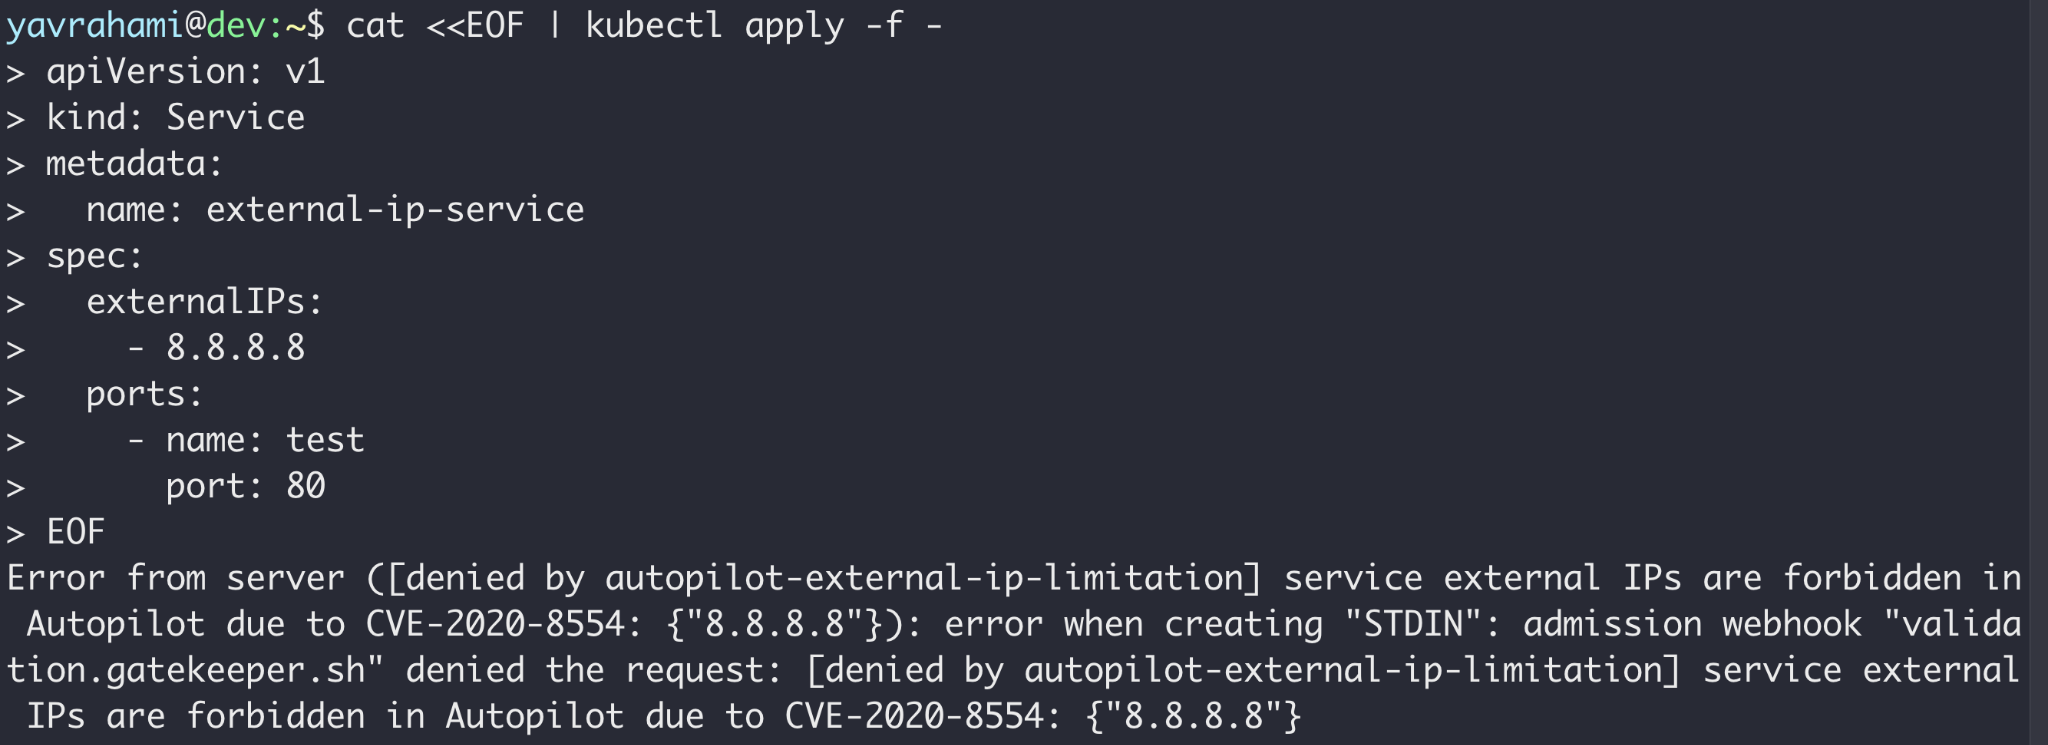 GKE Autopilot's policy goes beyond preventing container escapes. This screenshot shows how External IP services are denied to protect against CVE-2020-8554. 